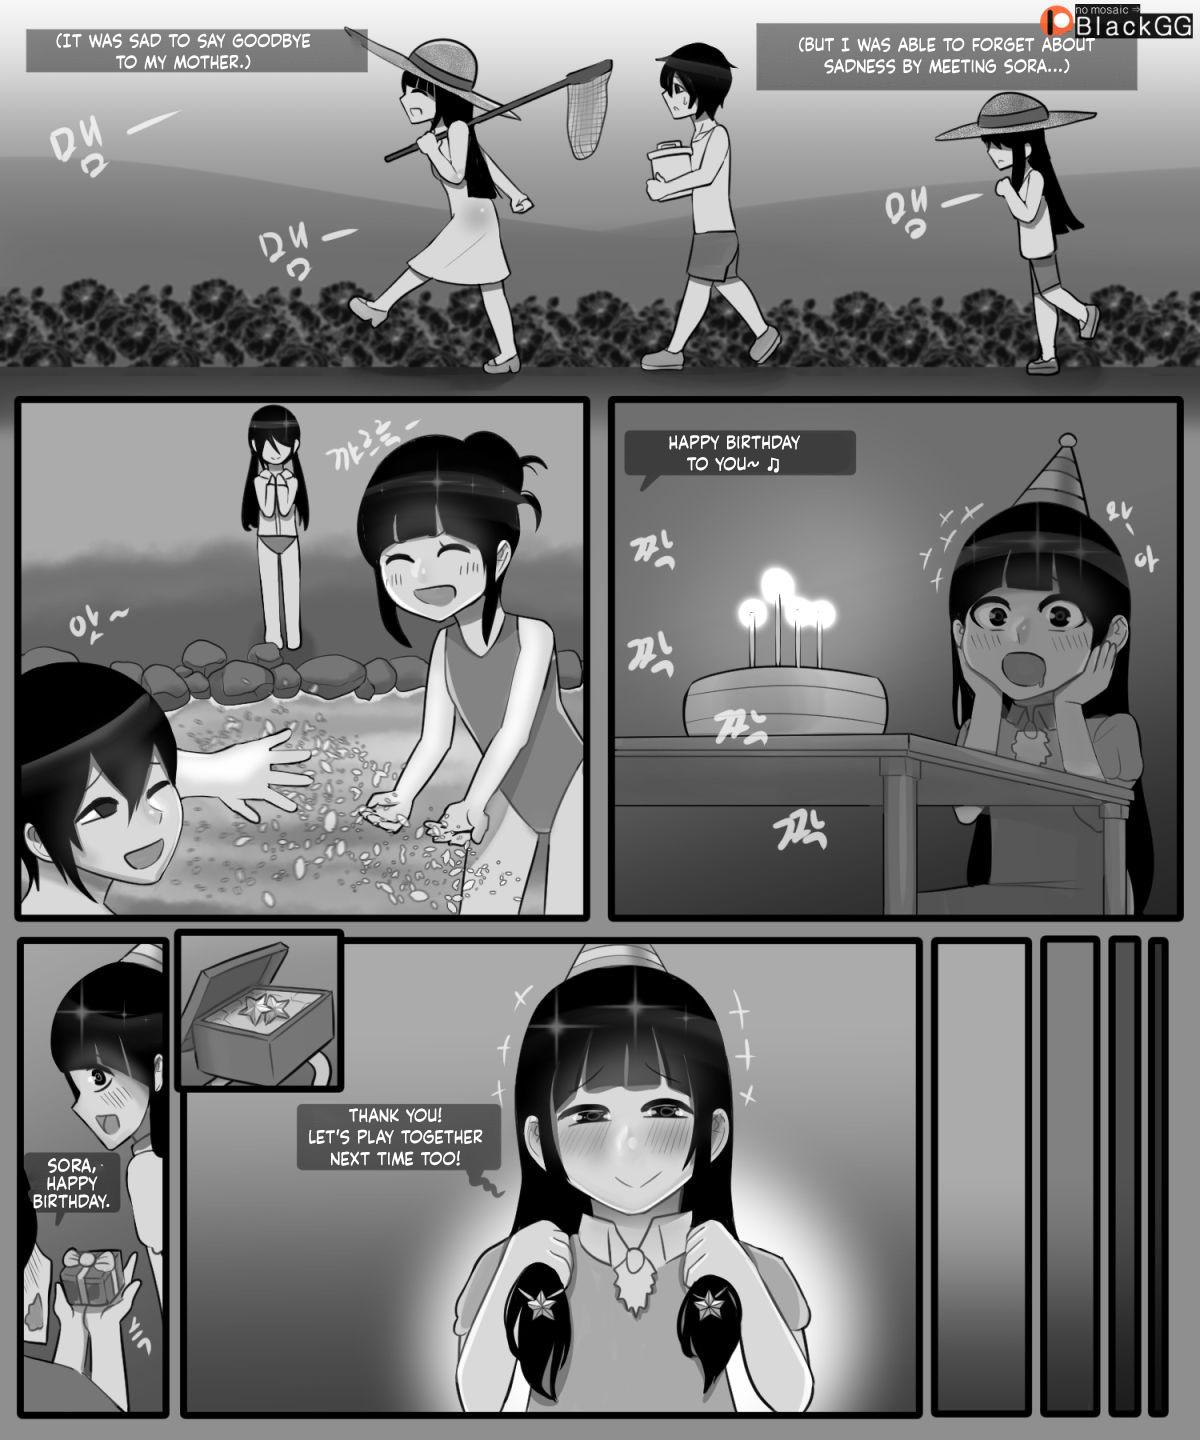 Couple Sex The story of a childhood friend becoming father's lover 1 - Original Gets - Page 3